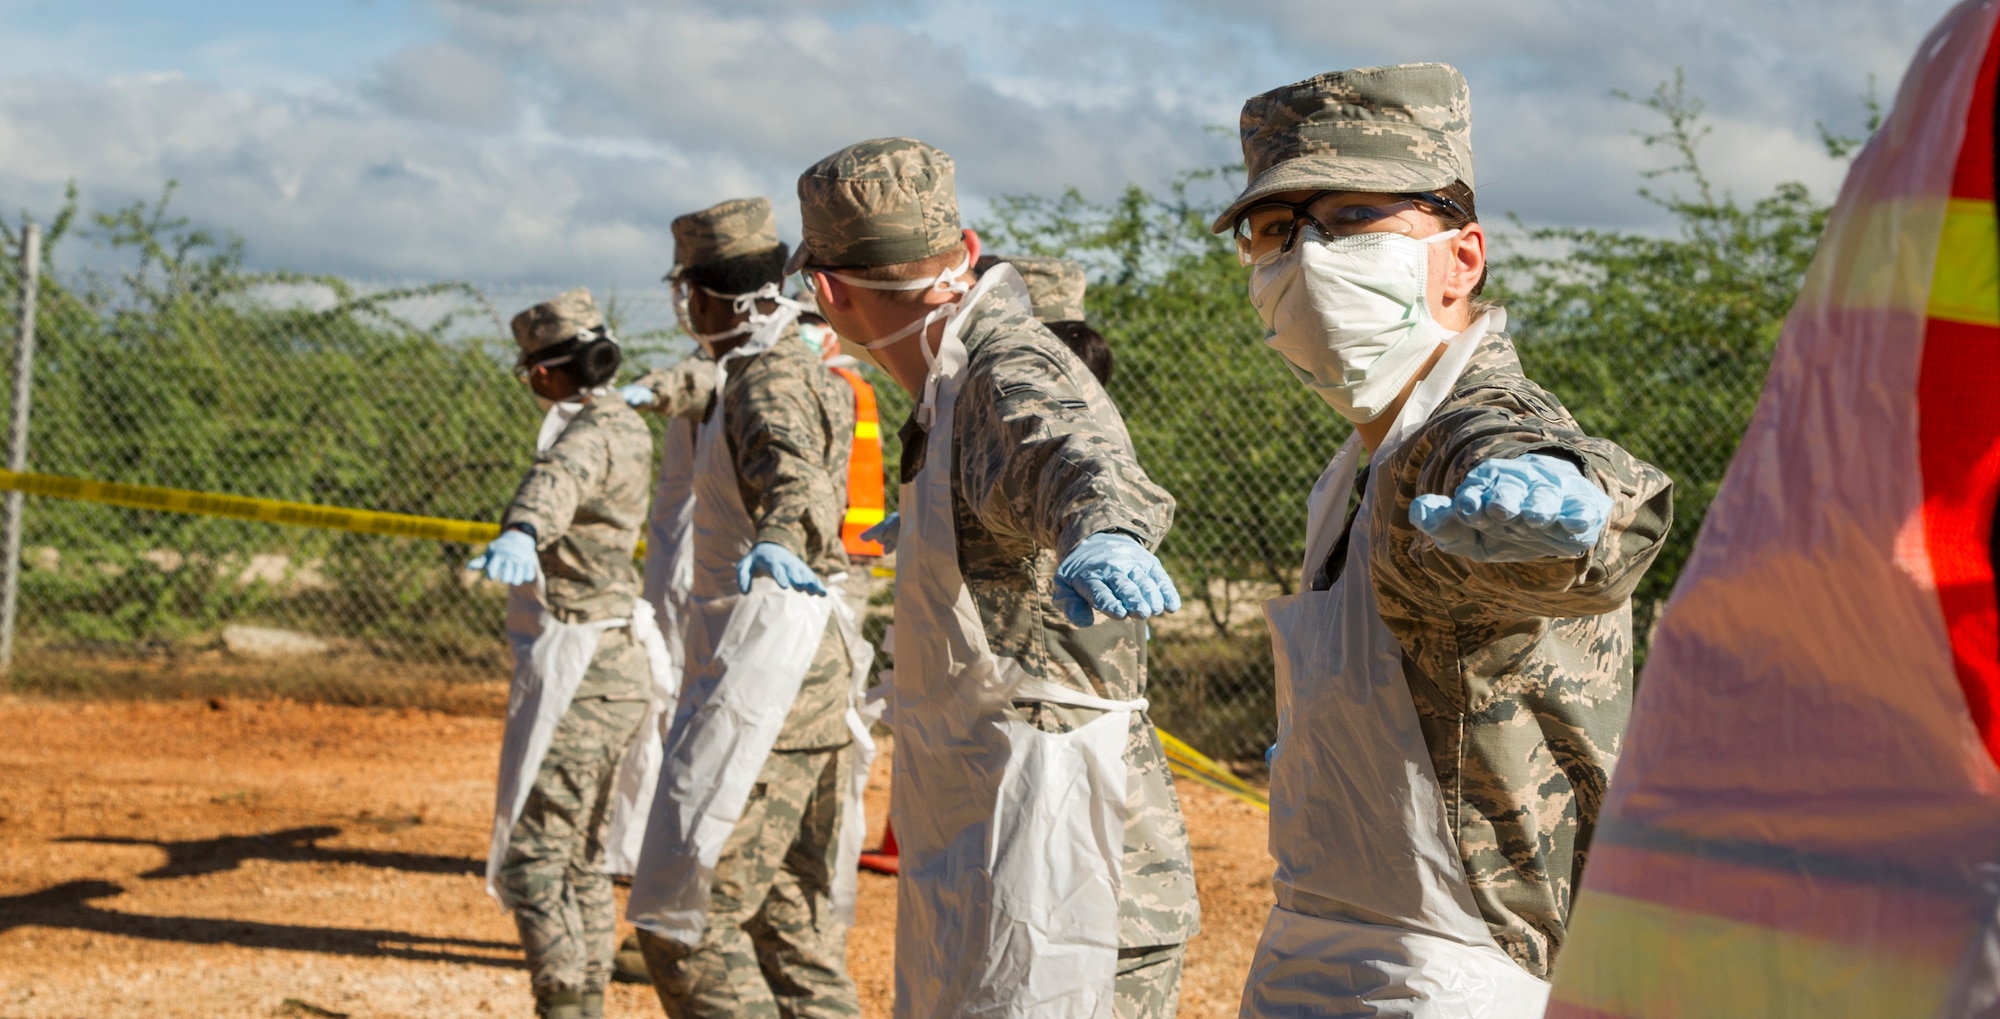 Airman 1st Class Hope Lockwood, 647th Force Support Squadron search and recovery team member, lines up with her teammates for a sweep during the search and recovery training event on Joint Base Pearl Harbor-Hickam, Hawaii, Oct. 27, 2017. The search and recovery team is tasked with recovering human remains from accident sites. (U.S. Air Force photo by Tech. Sgt. Heather Redman)